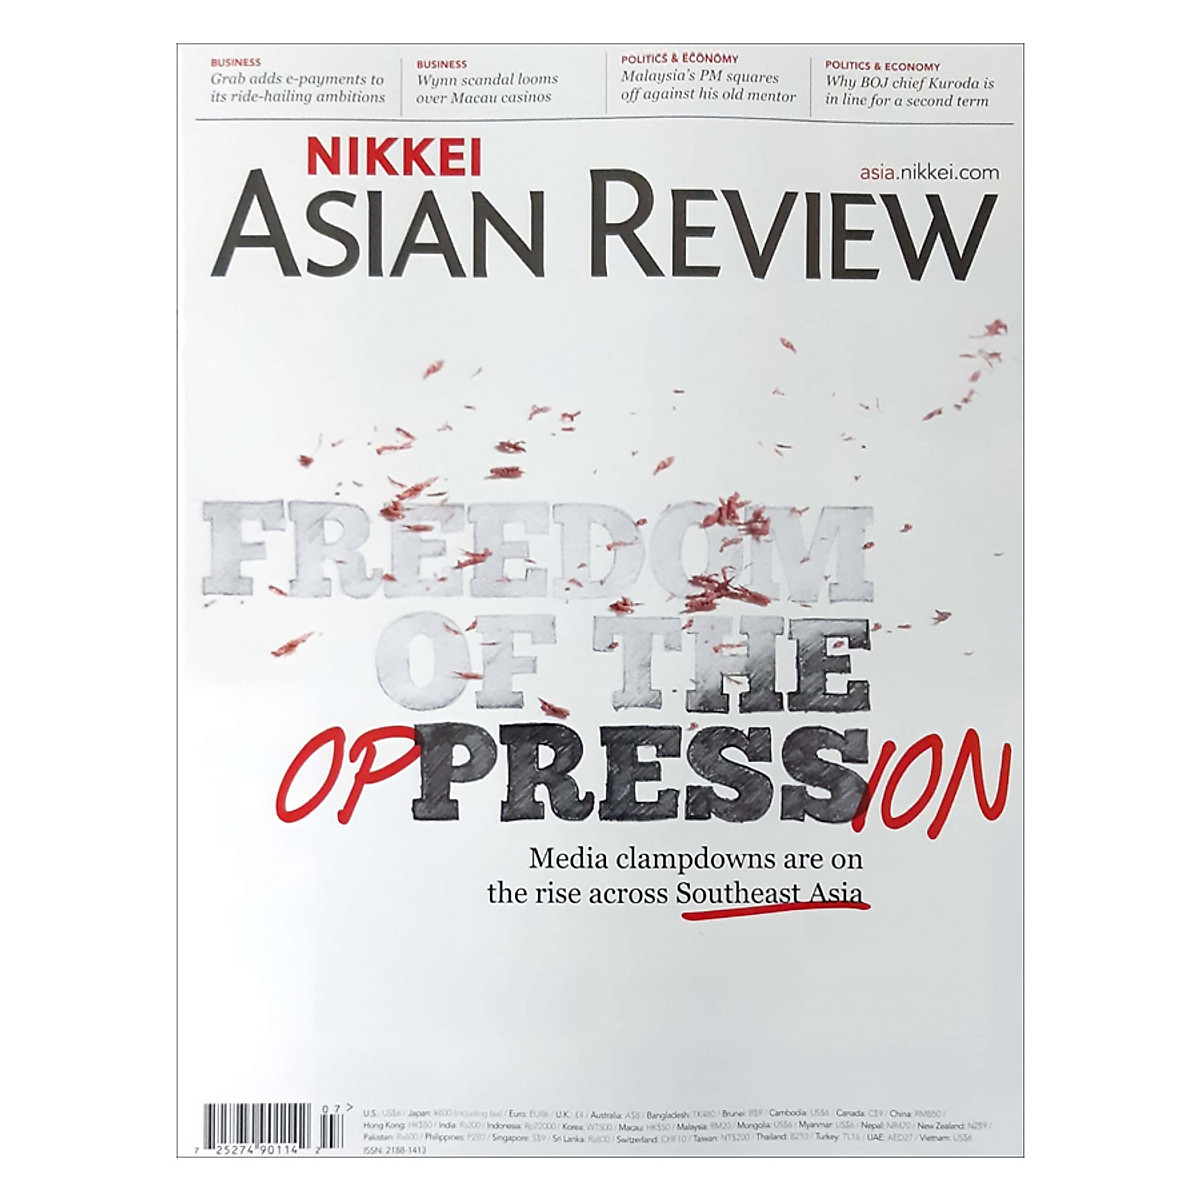 Nikkei Asian Review: Freedom Of The Oppression – 07